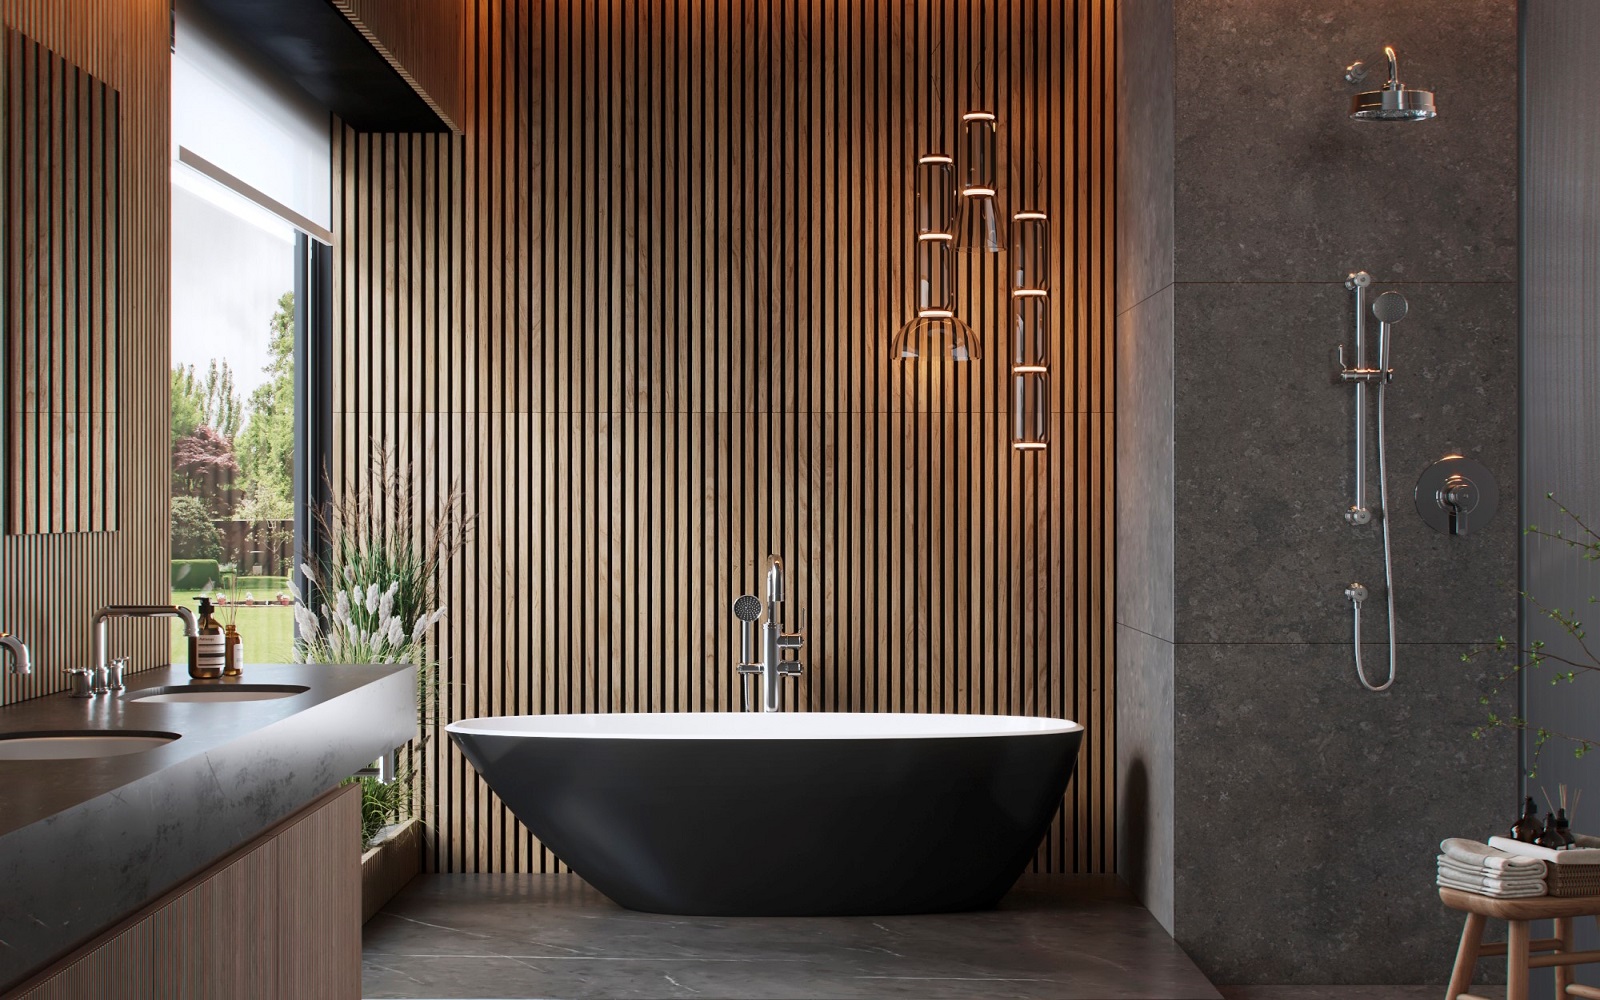 black freestanding bath from Perrin & Rowe Armstrong bathroom collection in front of wood clad walls and concrete surfaces